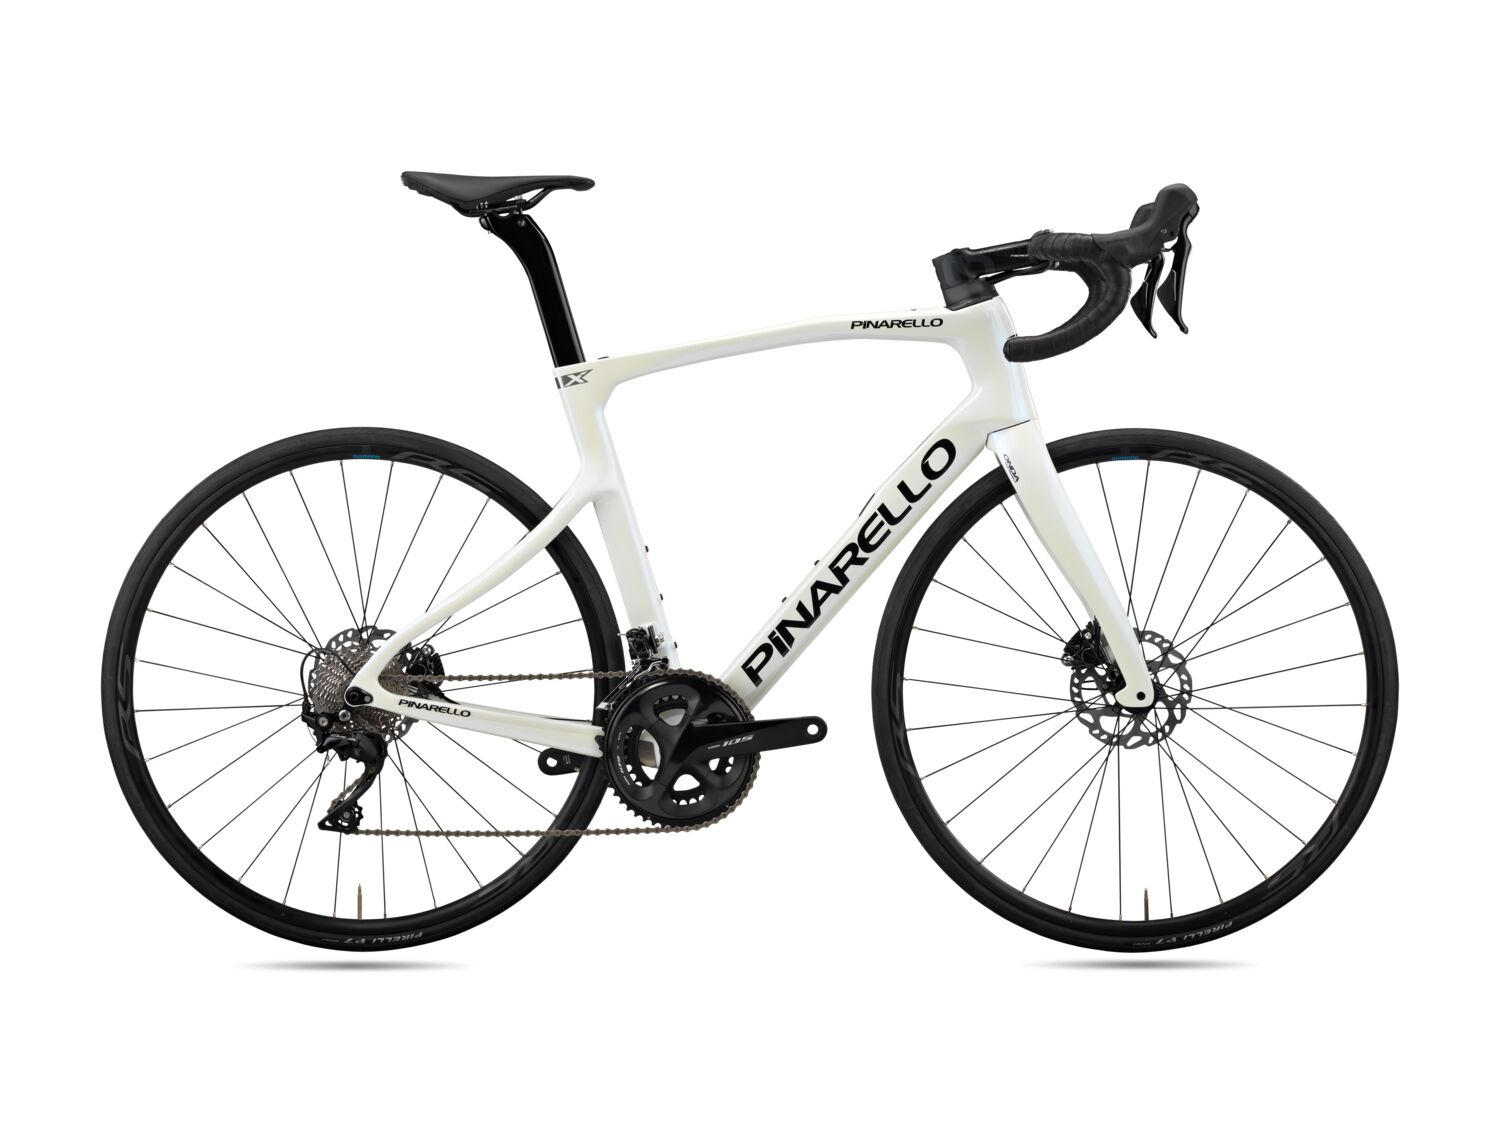 Pinarello launches X and F series Two frames aimed for endurance or